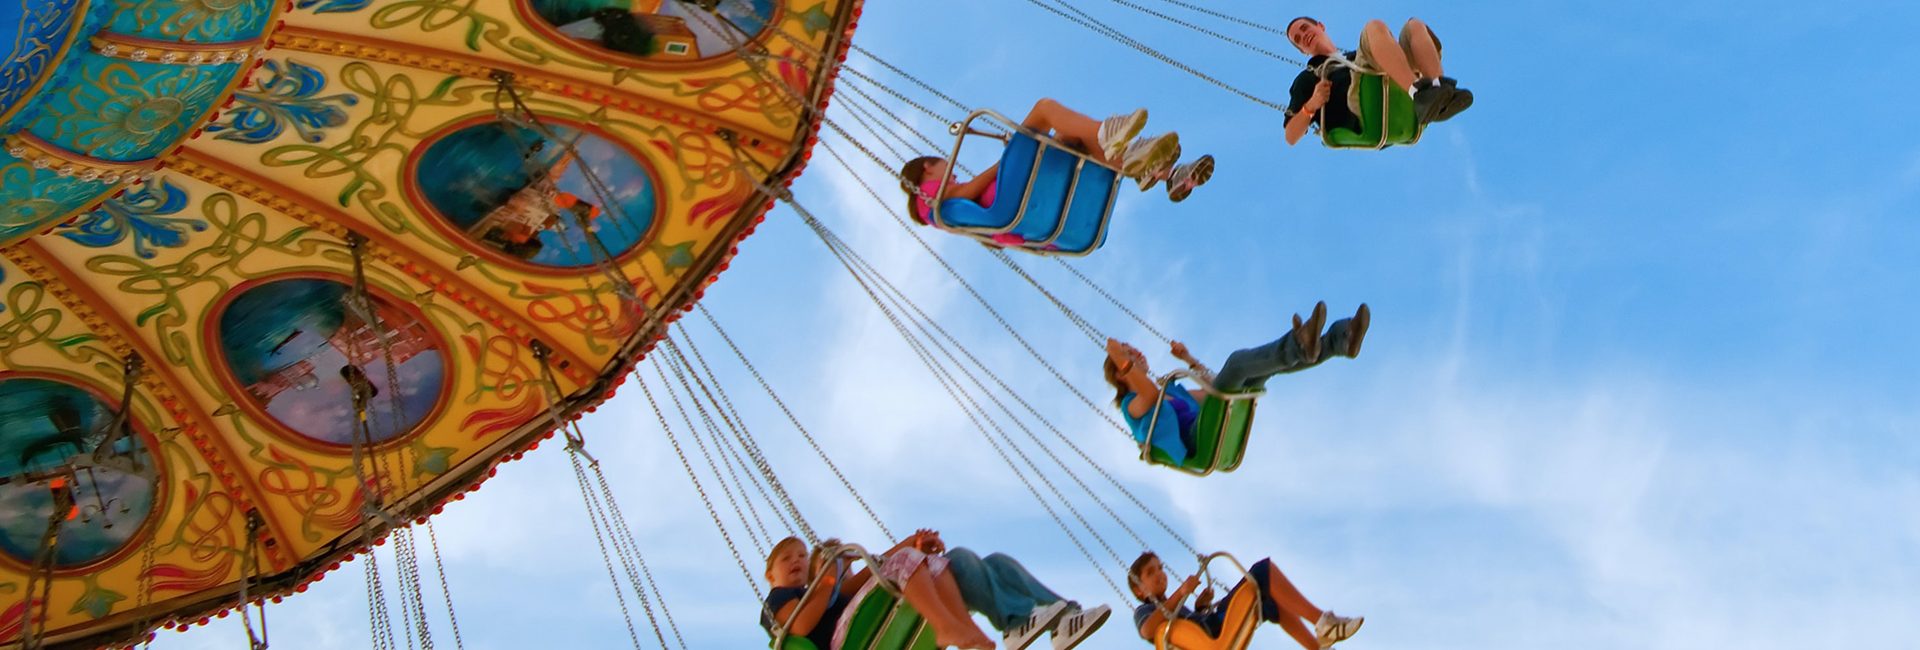 people-on-swing-ride-perspective-from-below-with-blue-sky-above